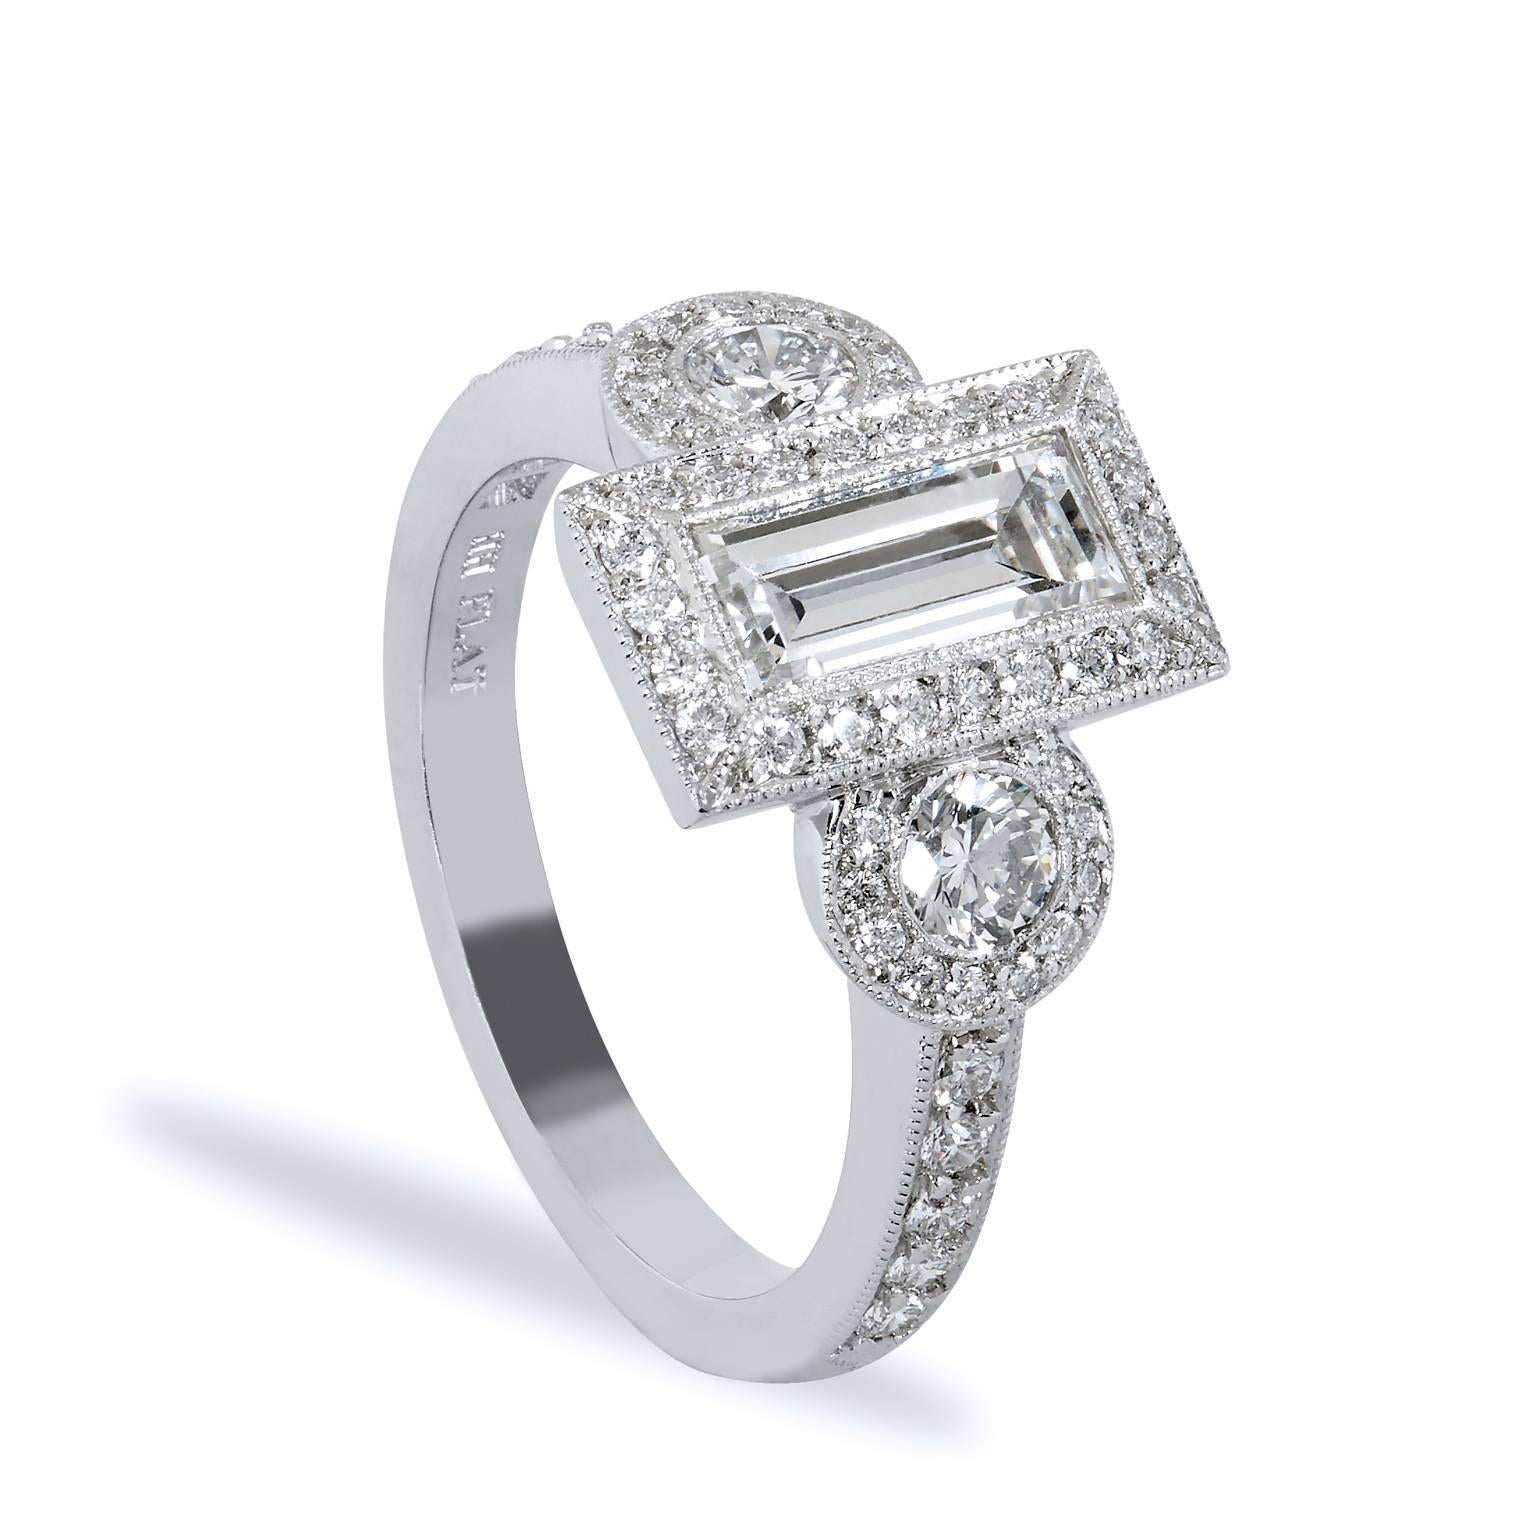 This ring showcases a truly feminine design that flawlessly marries structure with grace. Handcrafted in platinum, the ring features a 1.12ct GIA certified emerald cut diamond graded G-VS2 that displays clean symmetry in formation. The center